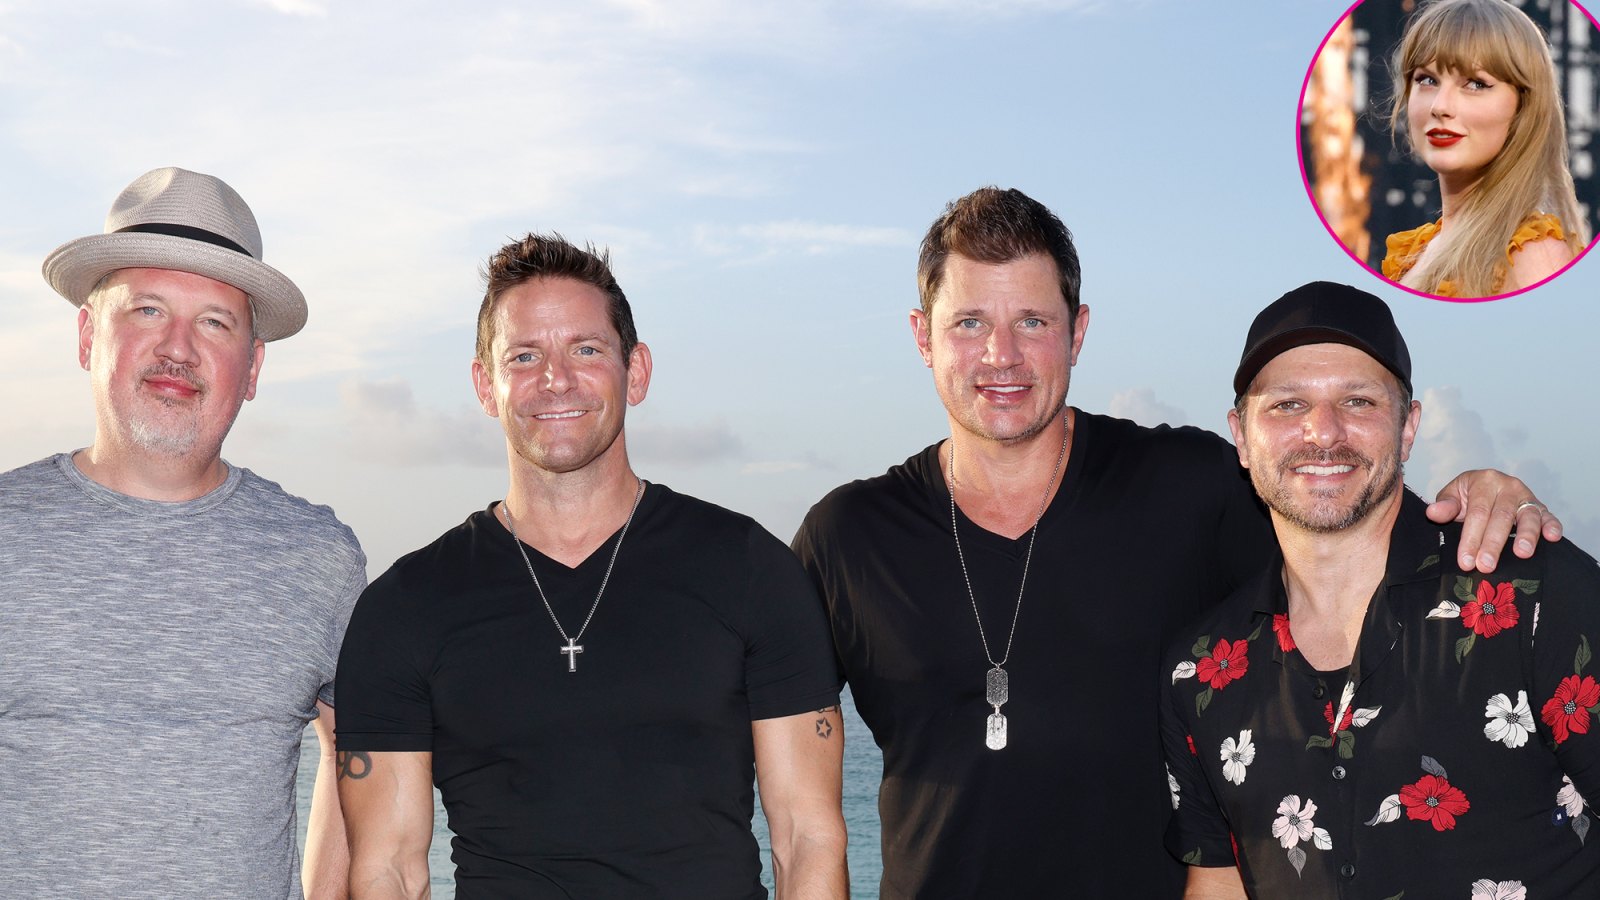 98 Degrees Takes on Fierce Game of 1998 Pop Culture Trivia: Watch